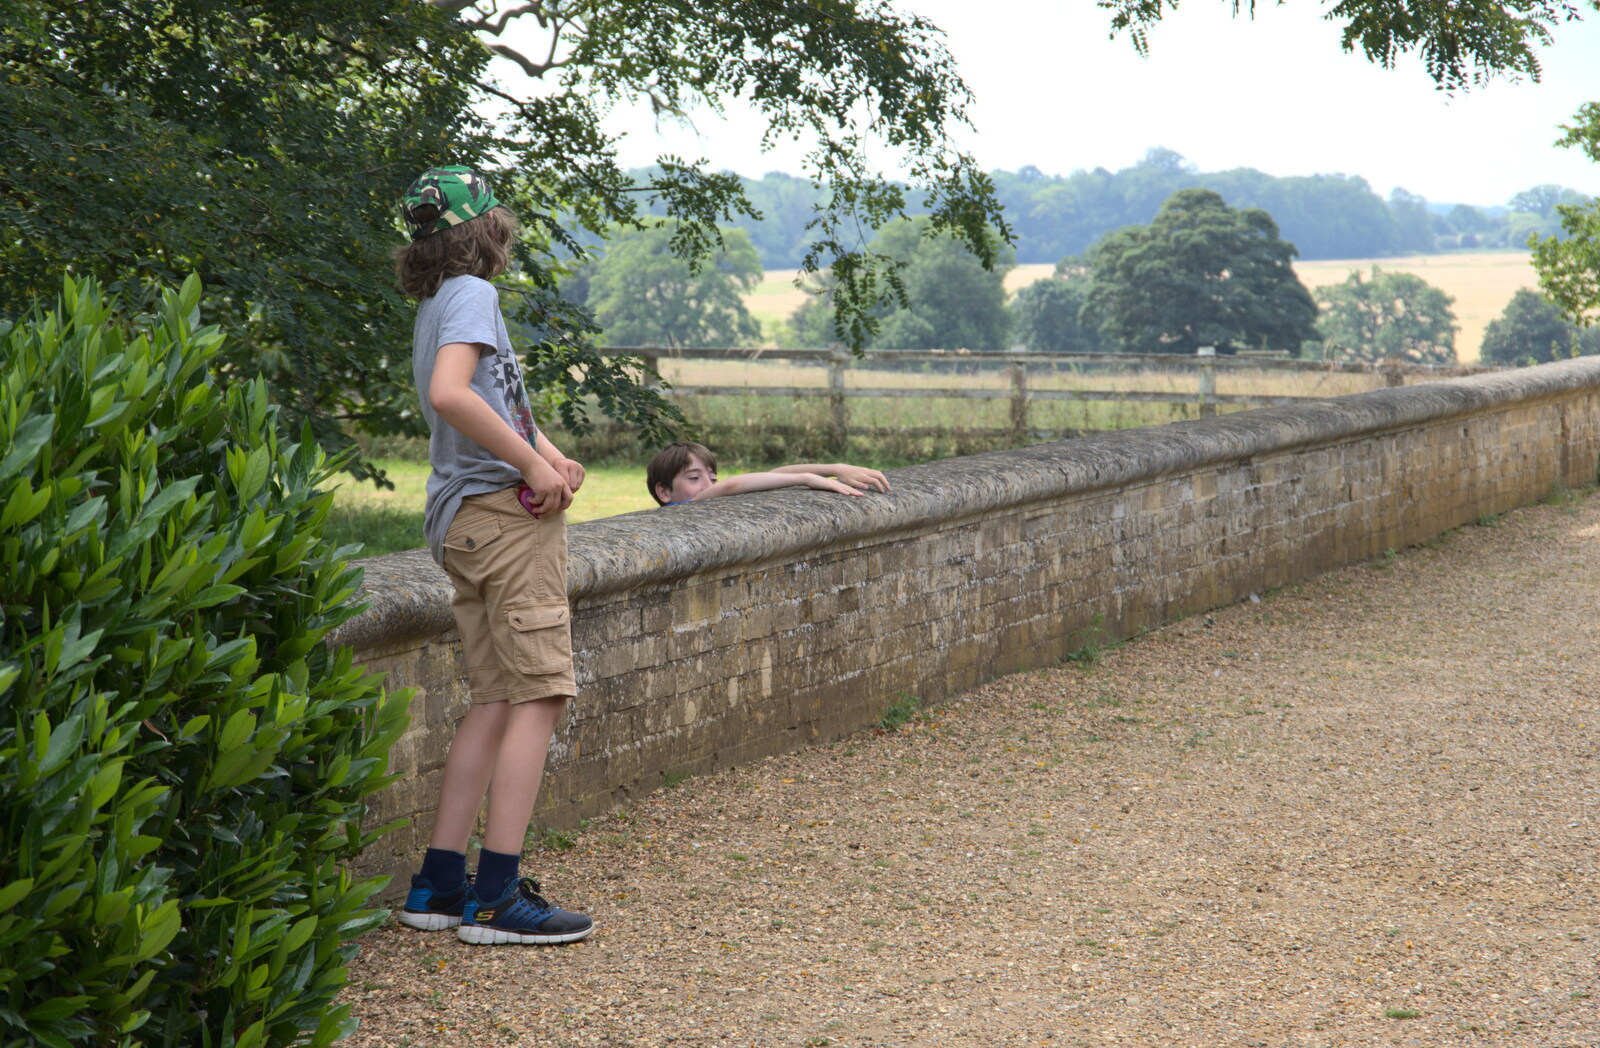 Fred looks over the wall from Back at Ickworth, and Oaksmere with the G-Unit, Horringer and Brome, Suffolk - 8th August 2020